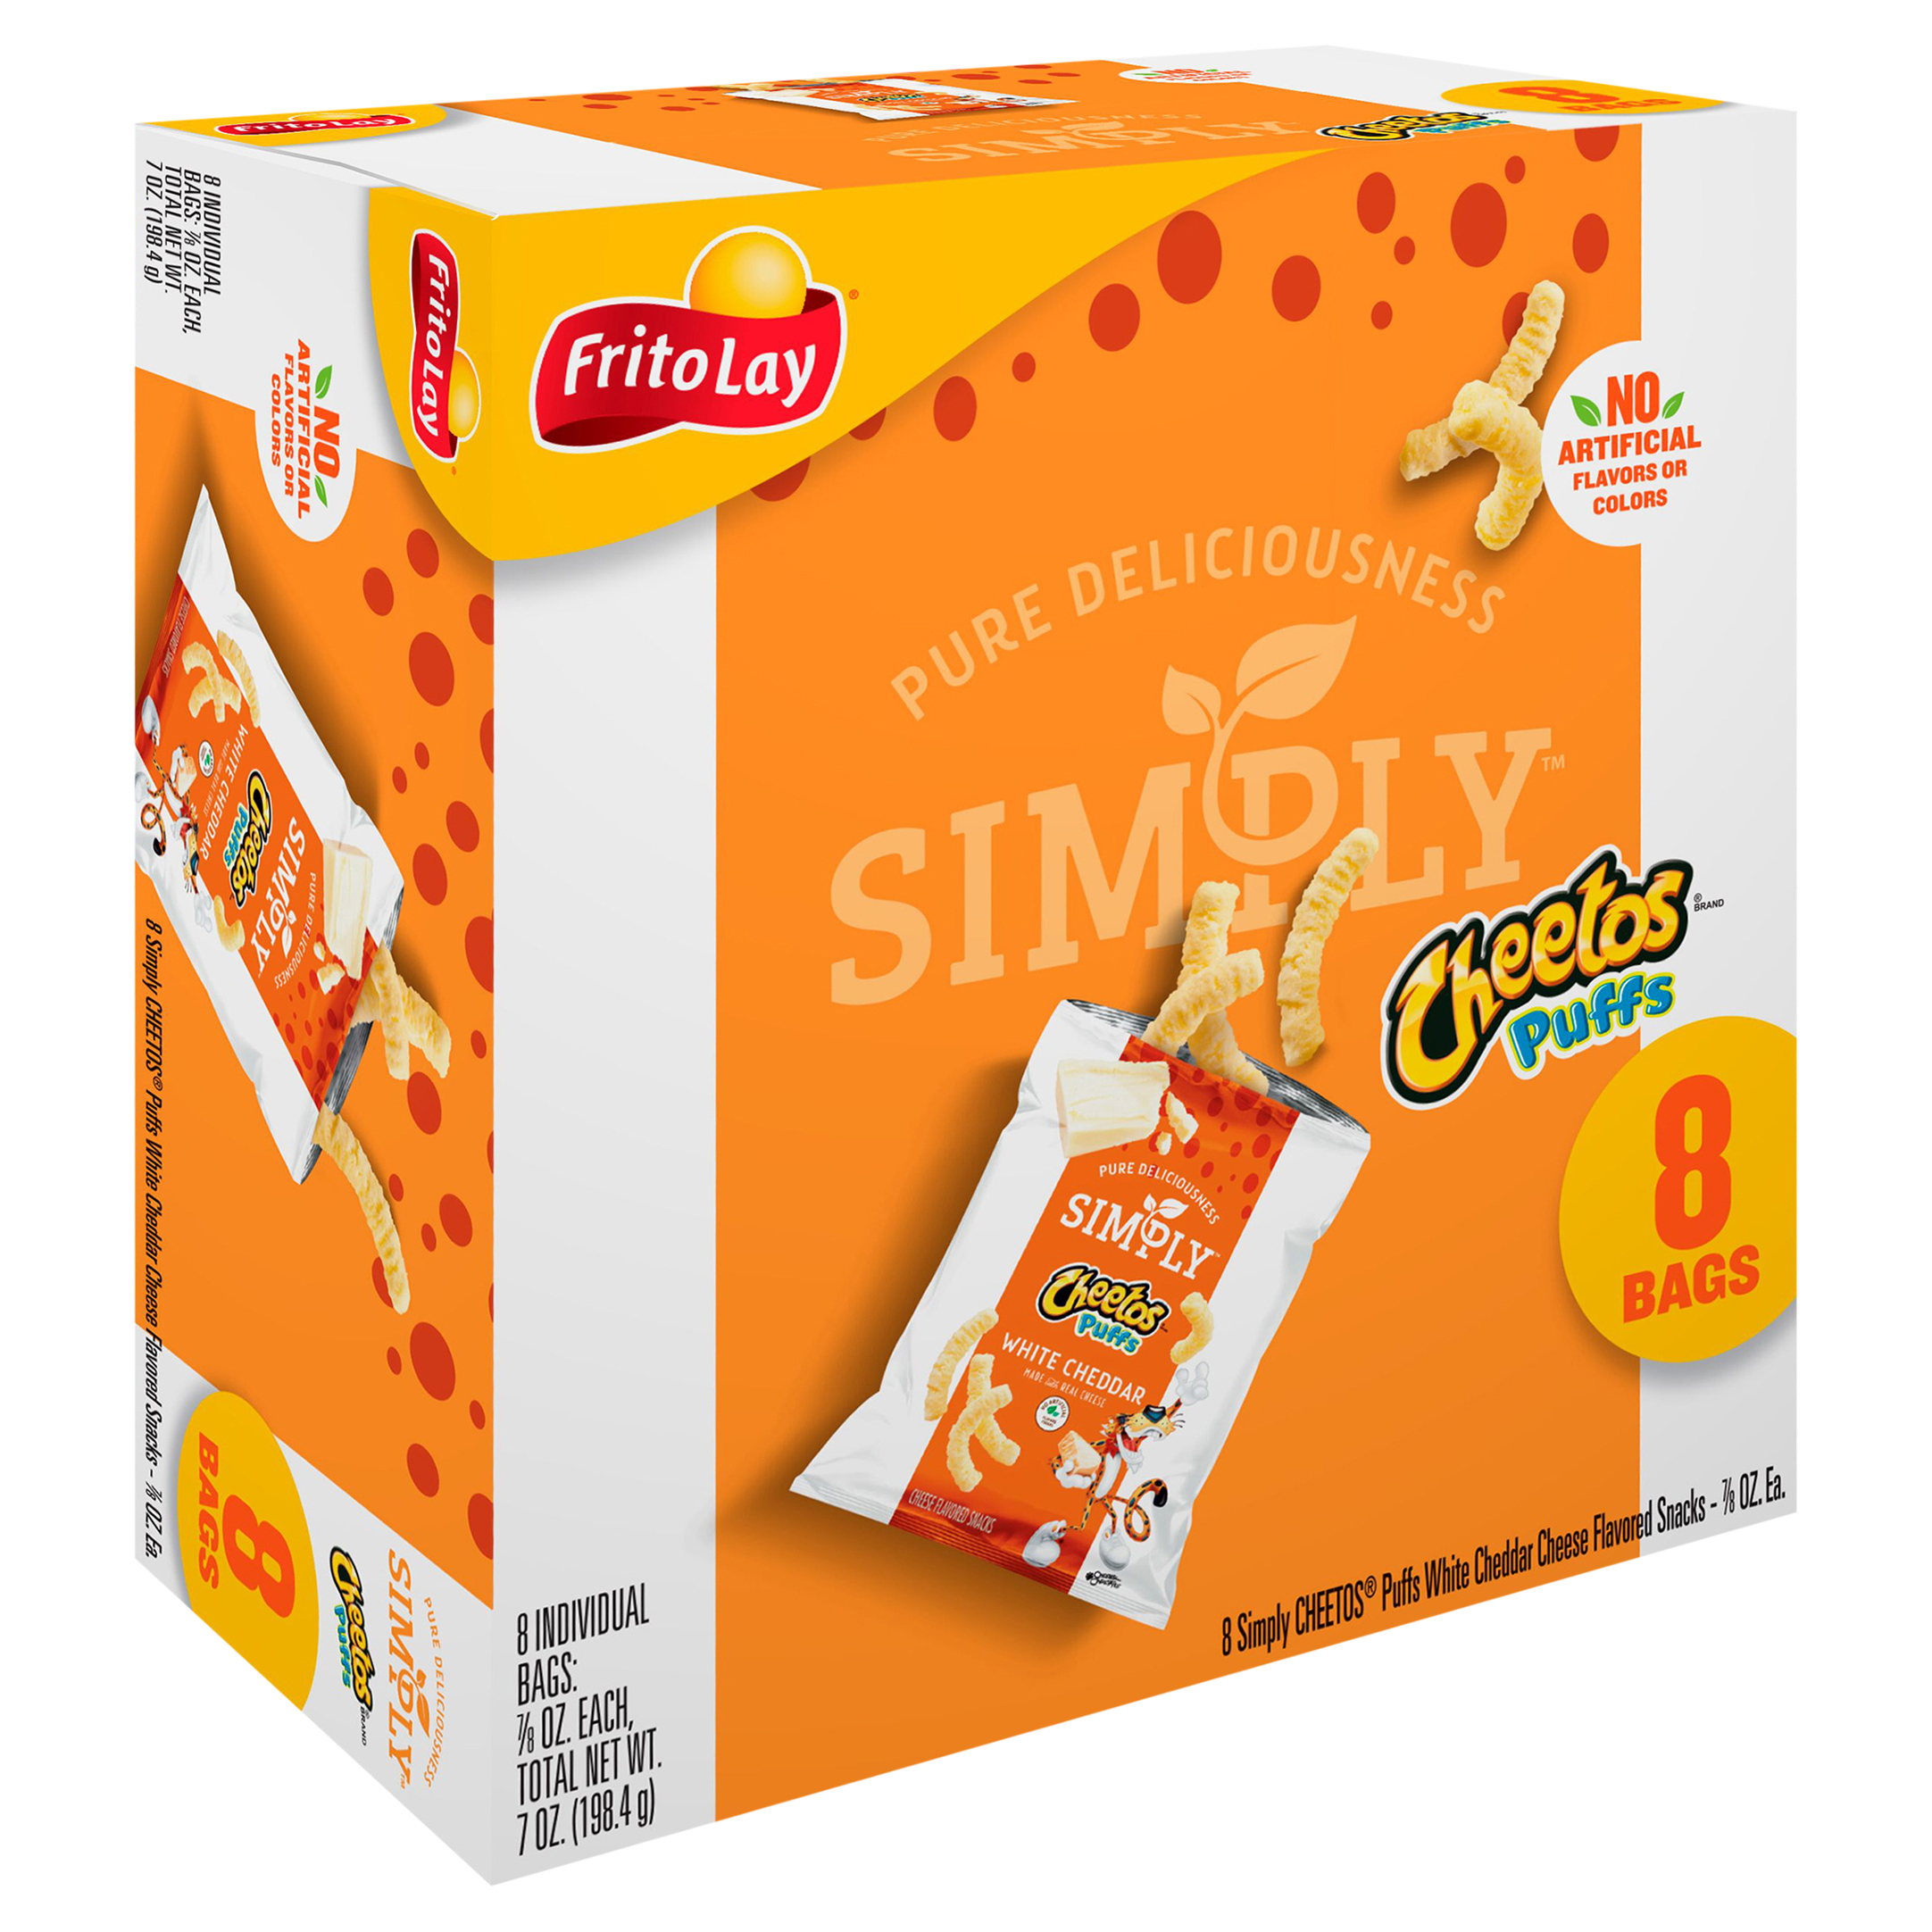 Cheetos Puff Cheese Flavored Snack Chips, 8 oz